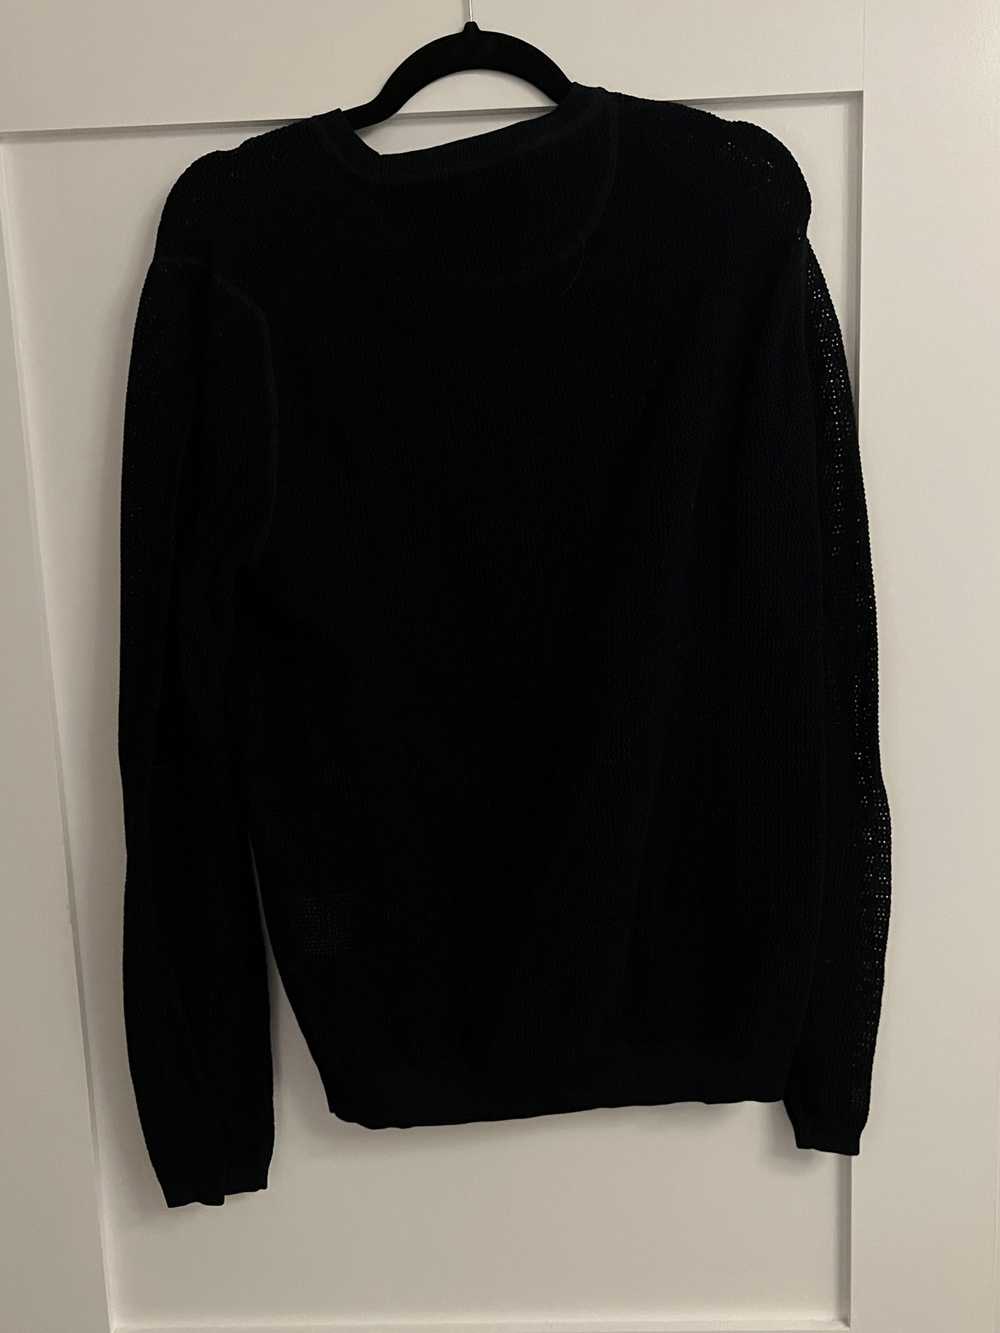 Acne Studios Navy Knit Pullover - image 3